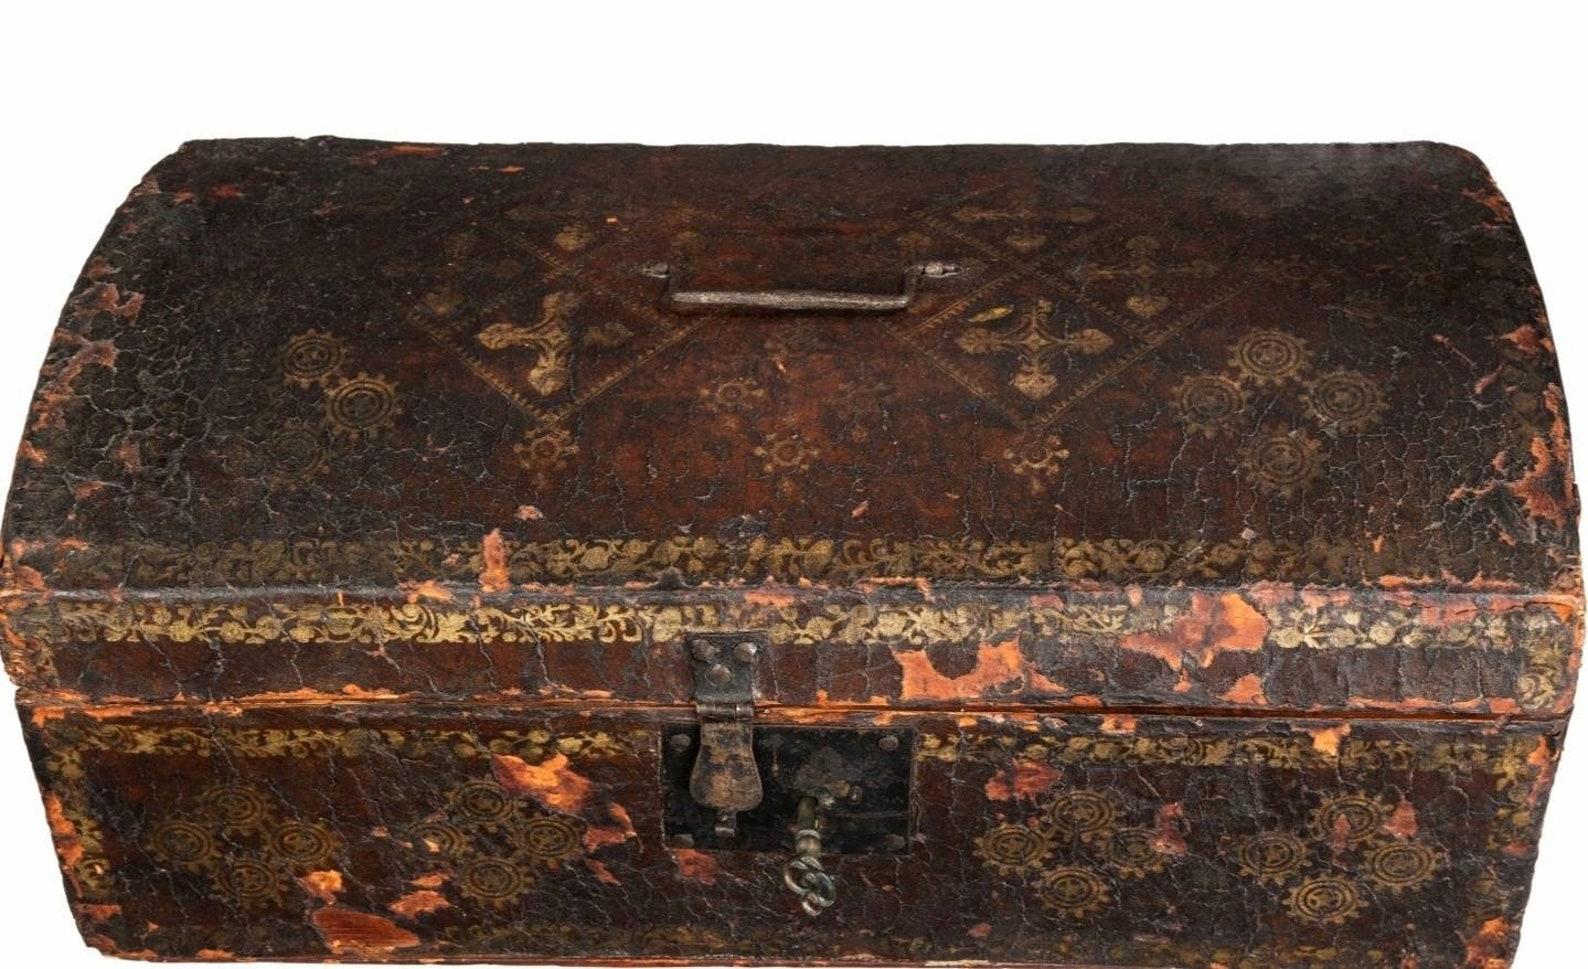 Historic 18th Century Early American Hide Wrapped Document Box 6